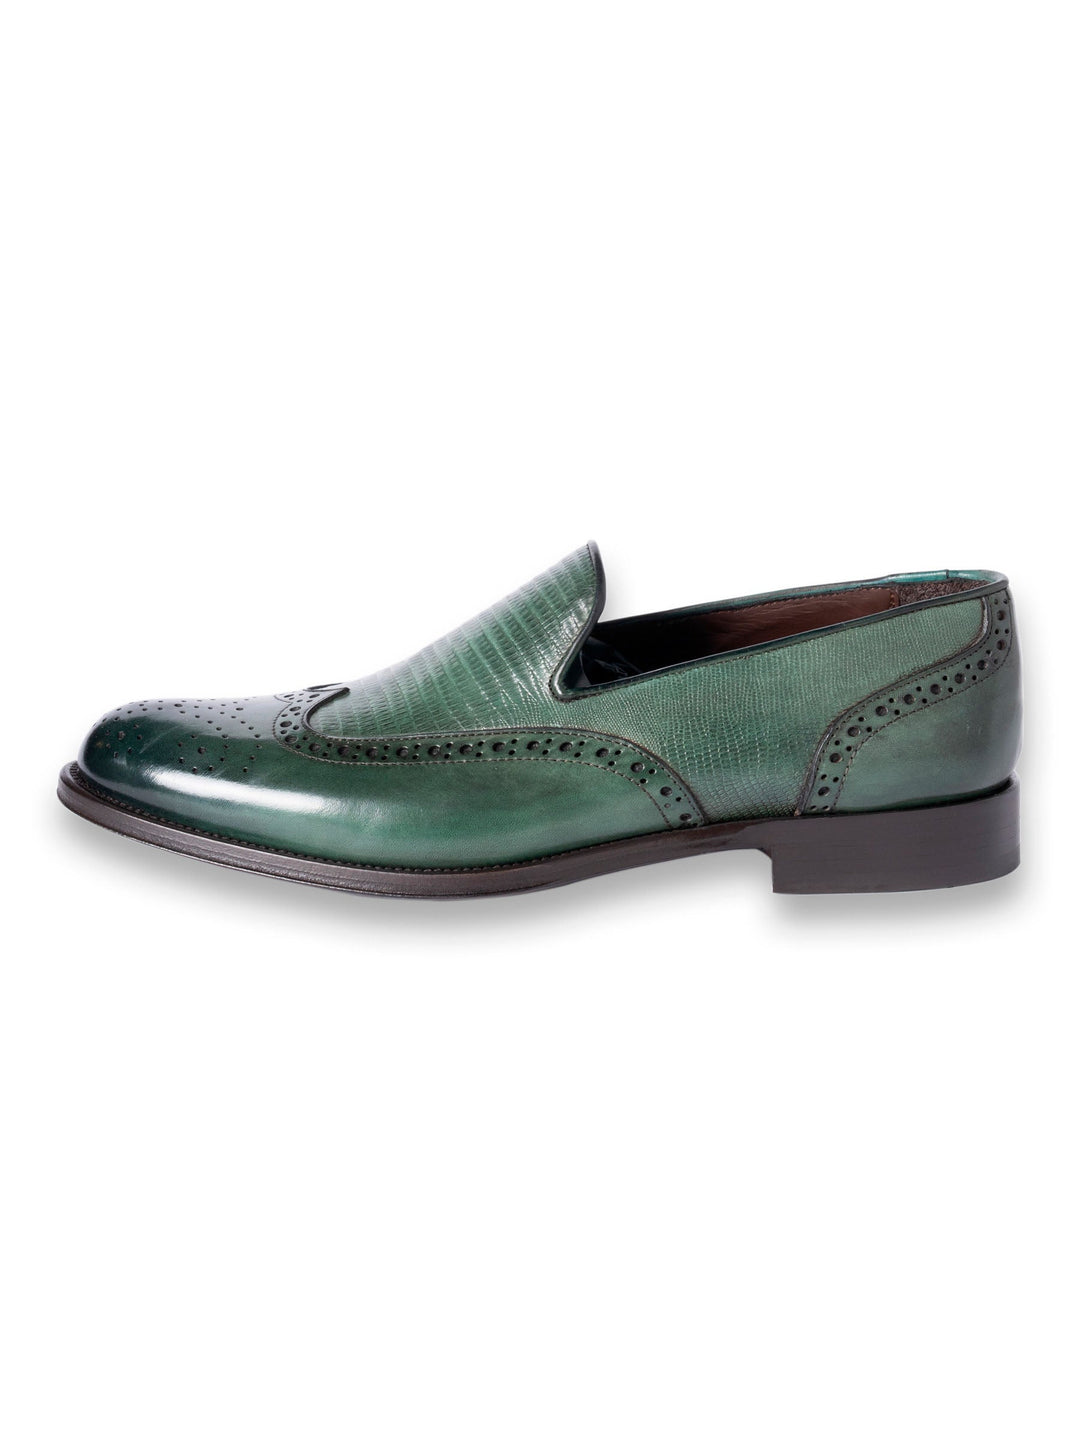 Green leather brogue slip-on shoe with decorative perforations